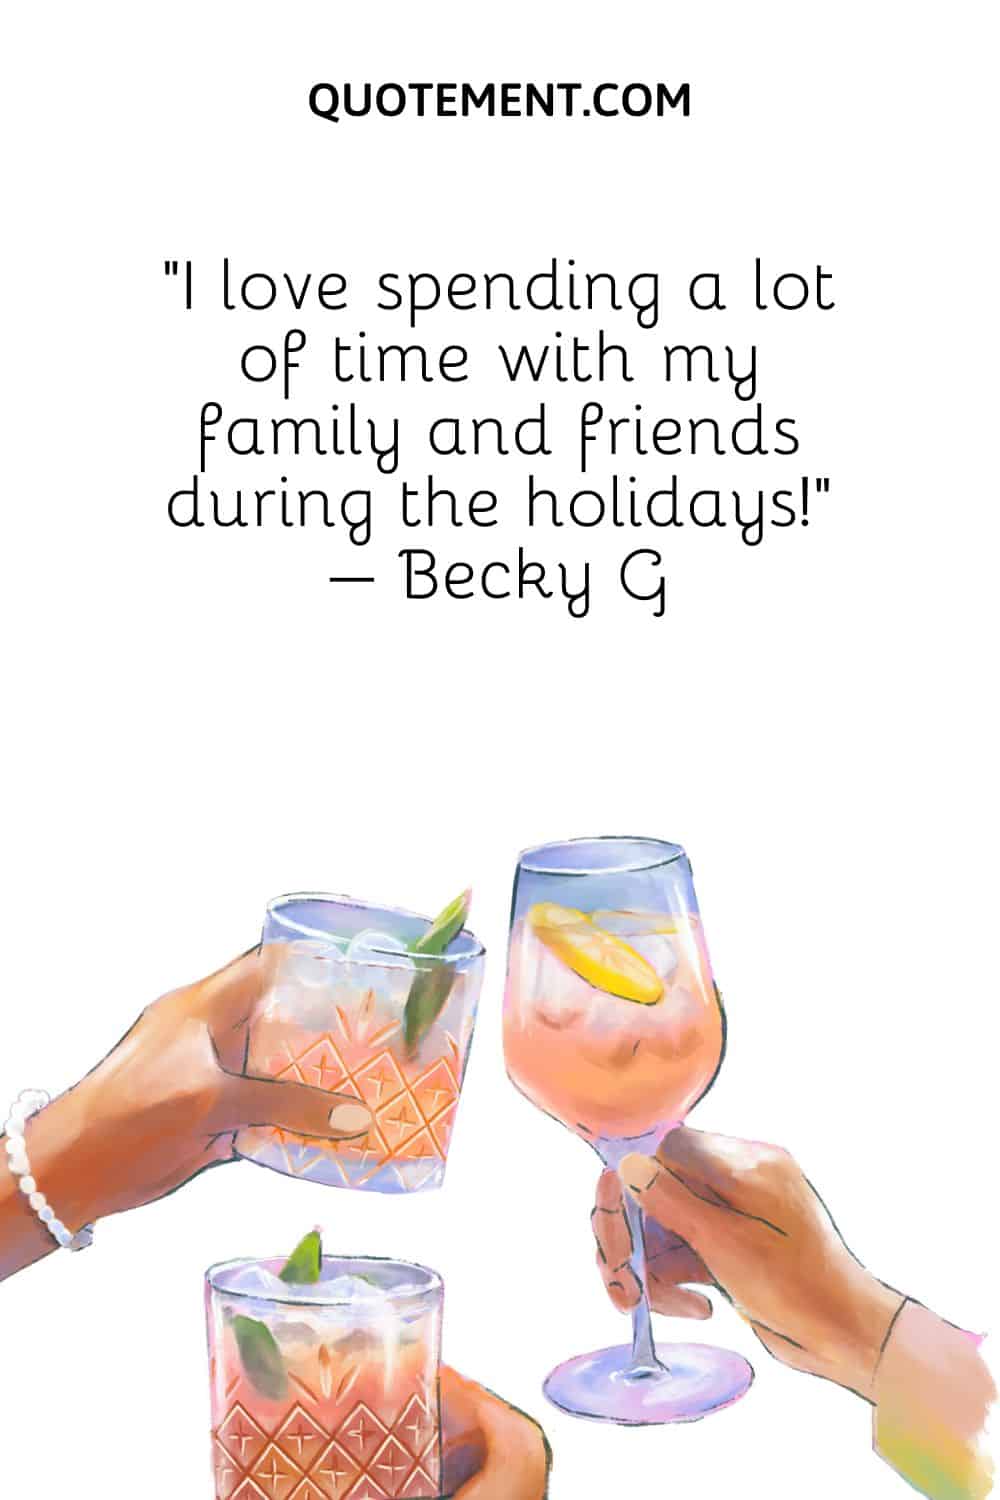 “I love spending a lot of time with my family and friends during the holidays!” – Becky G